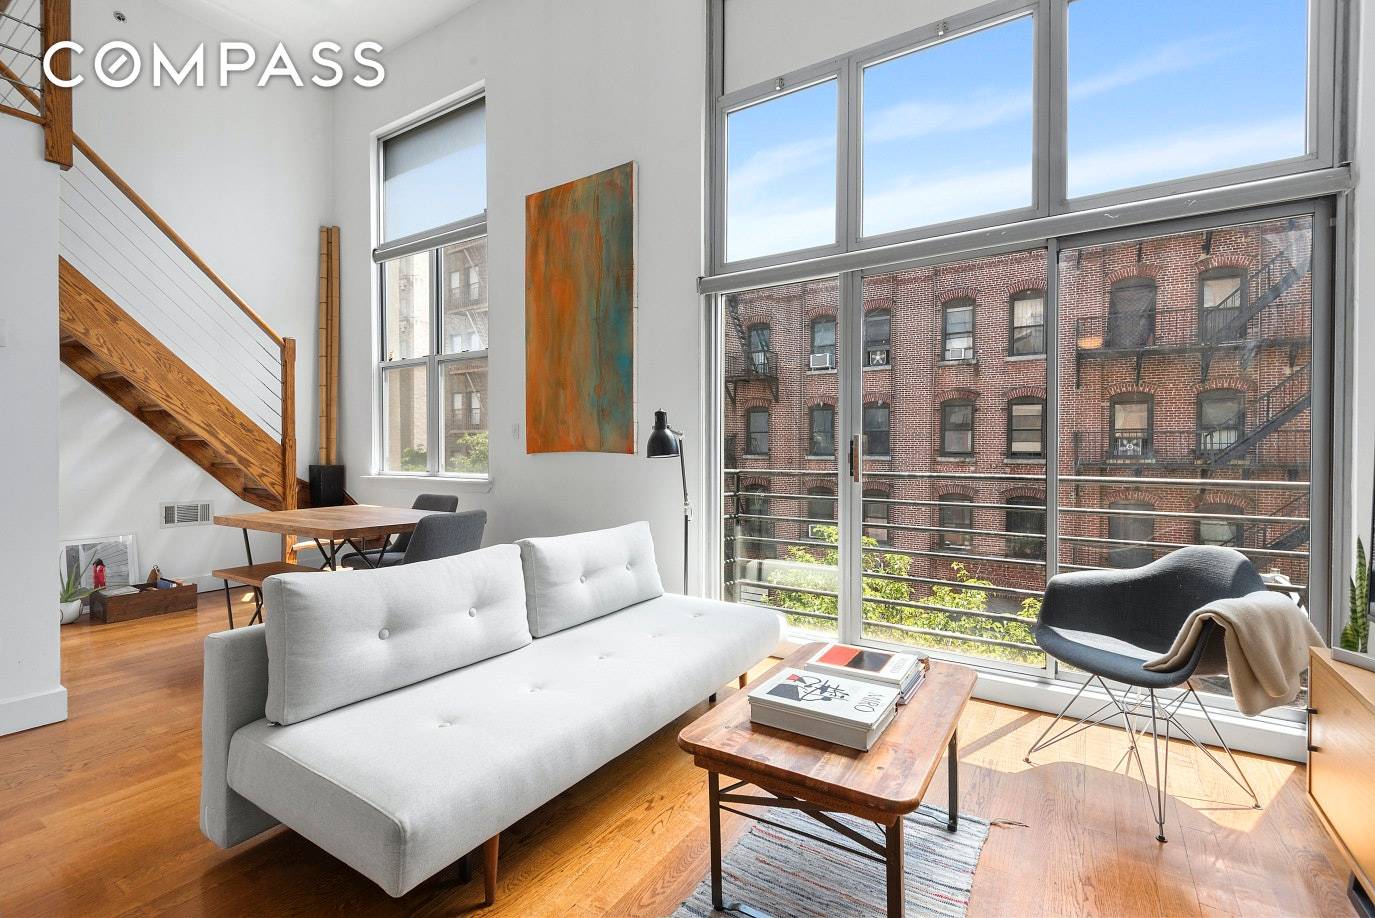 A beautiful, light filled one bedroom condo with W D in prime South Williamsburg.